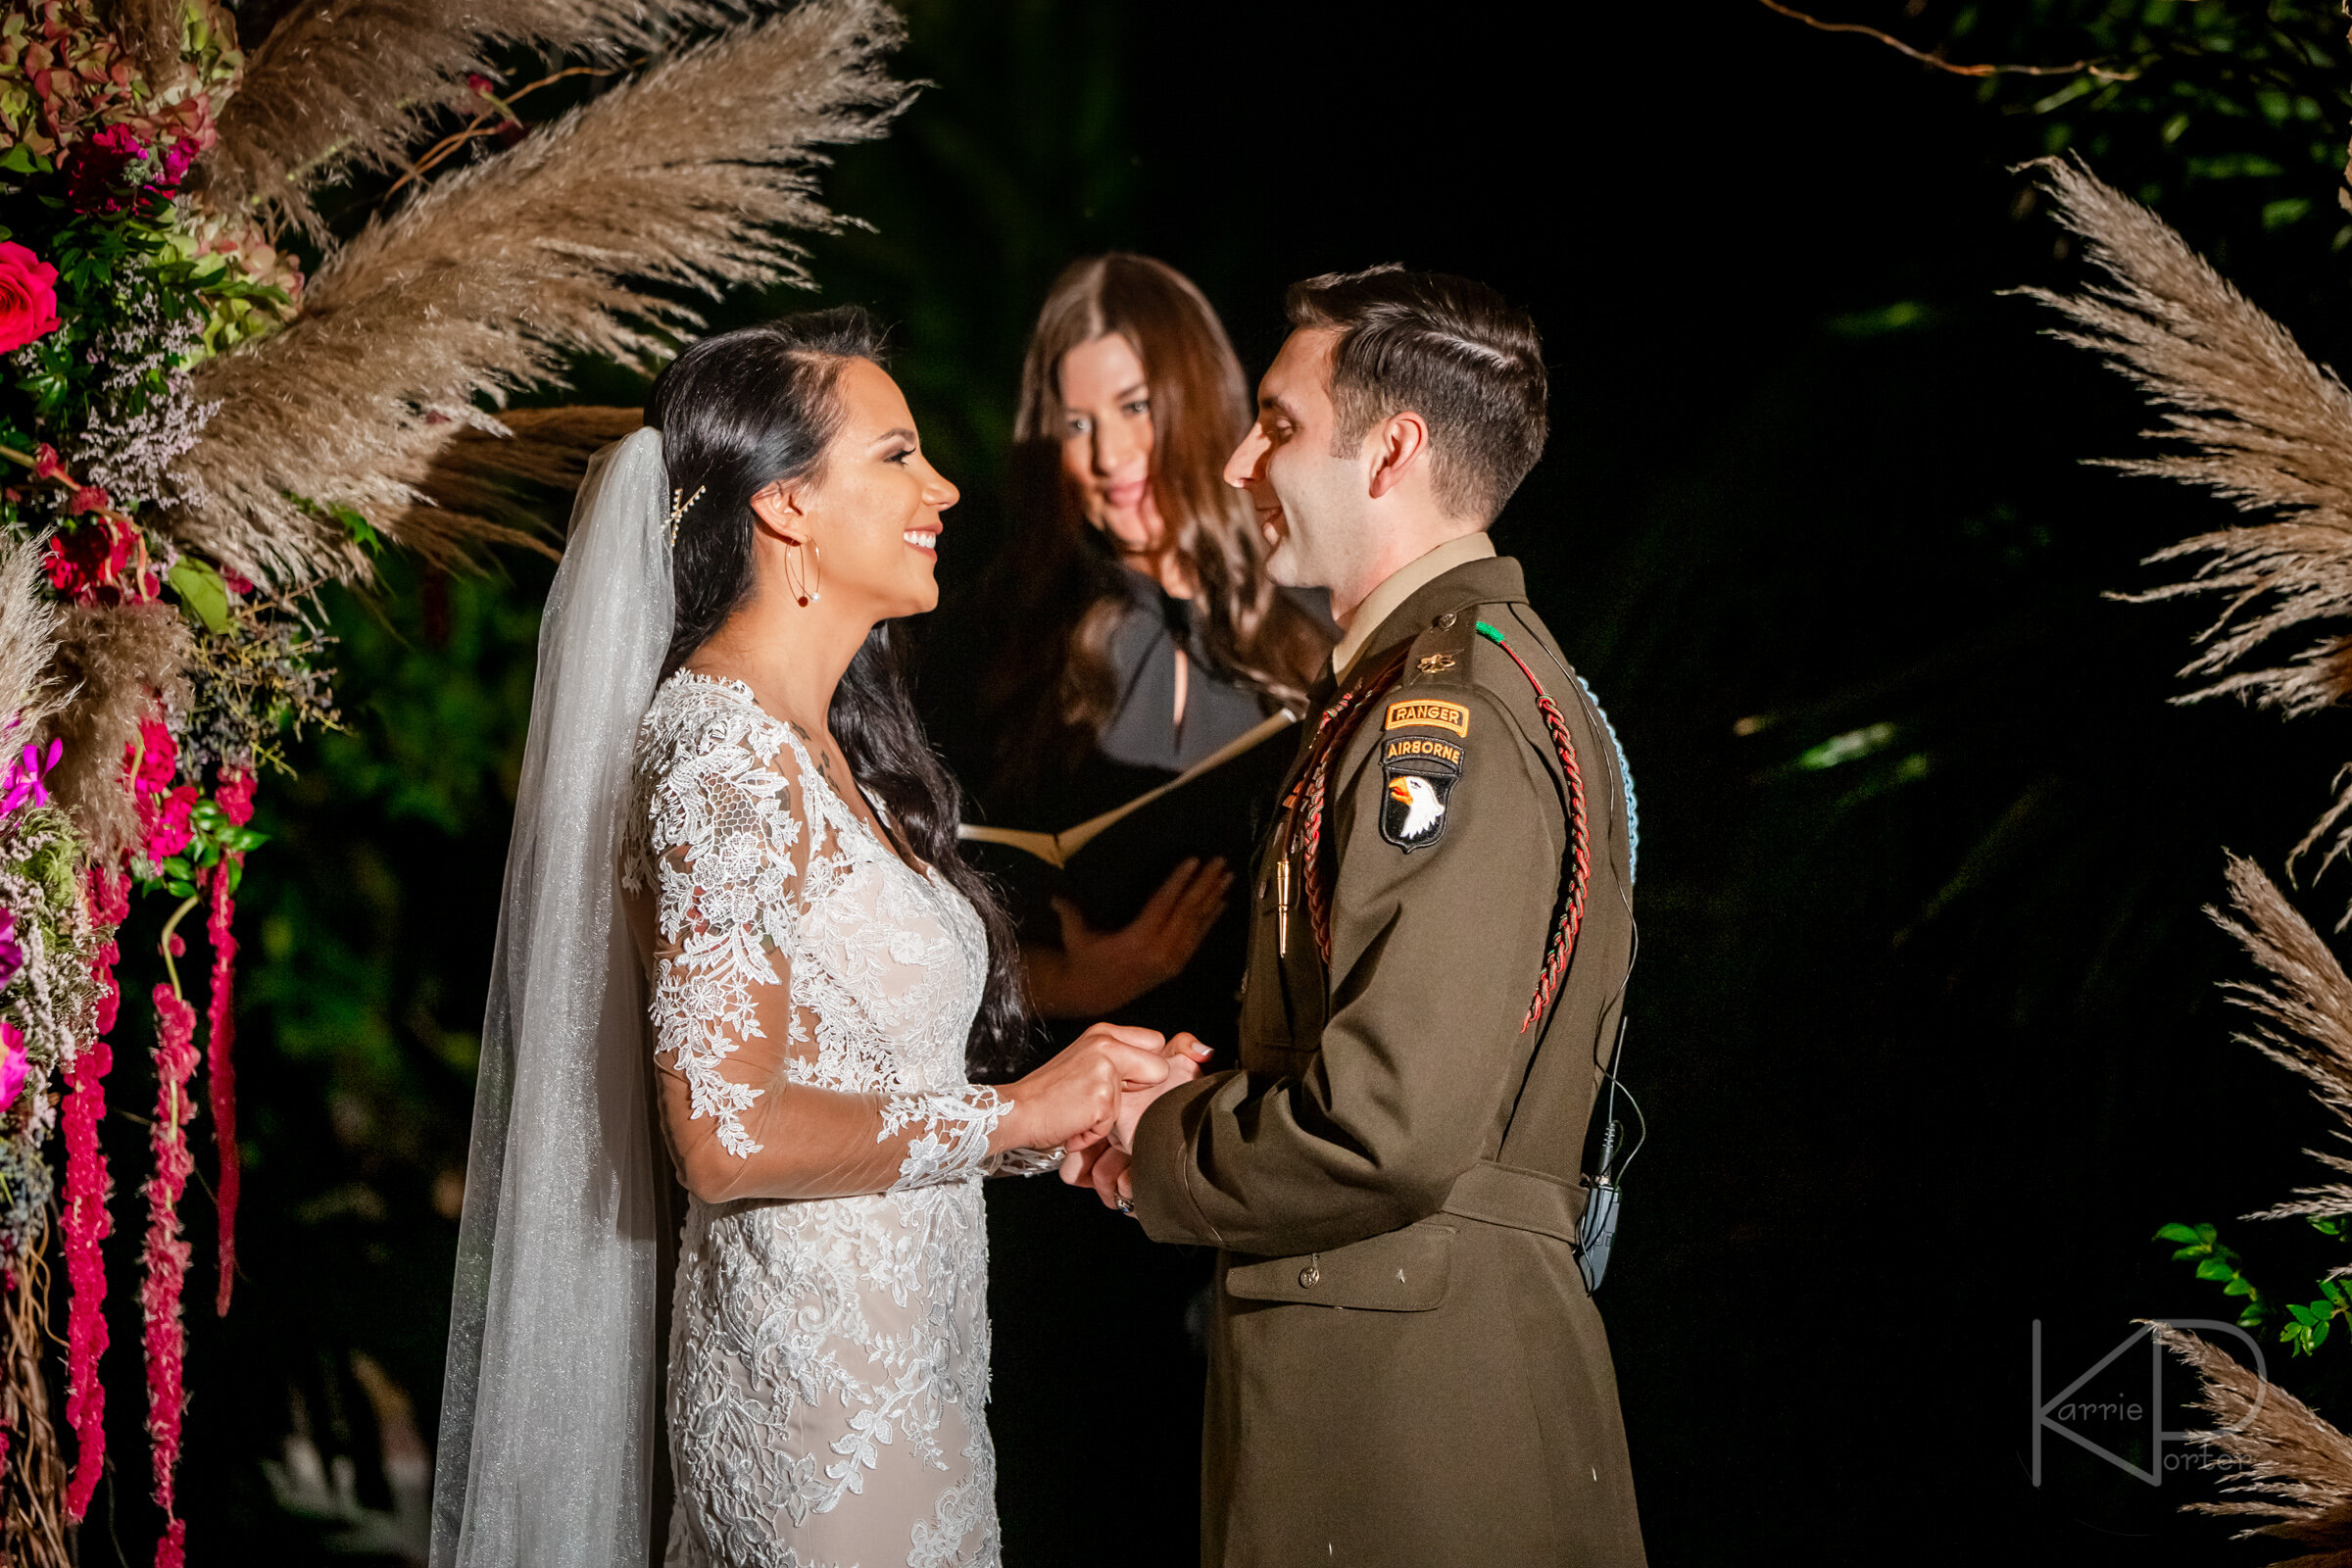  Kruse Wedding at Hemingway Home in Key West by Karrie Porter Photography 